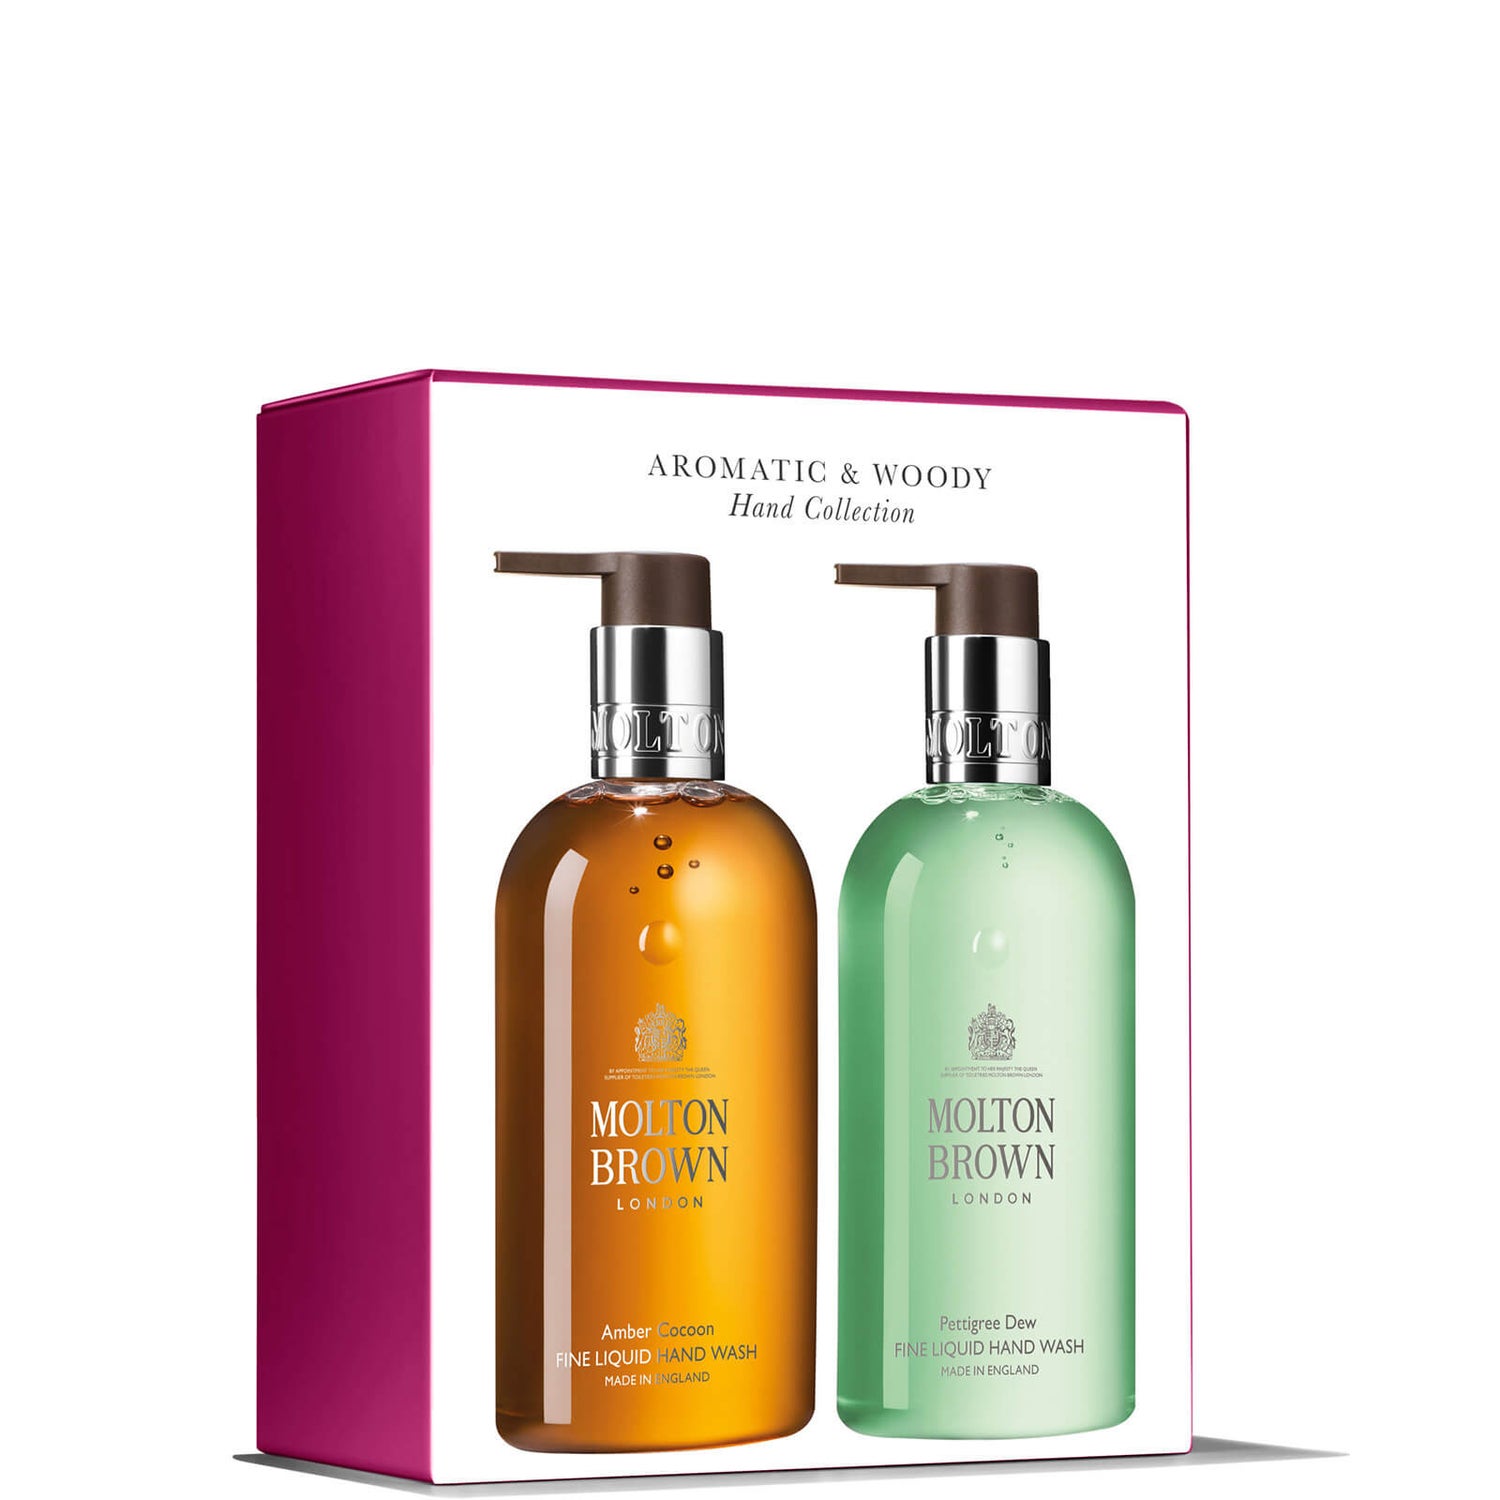 Molton Brown Aromatic and Woody Hand Collection